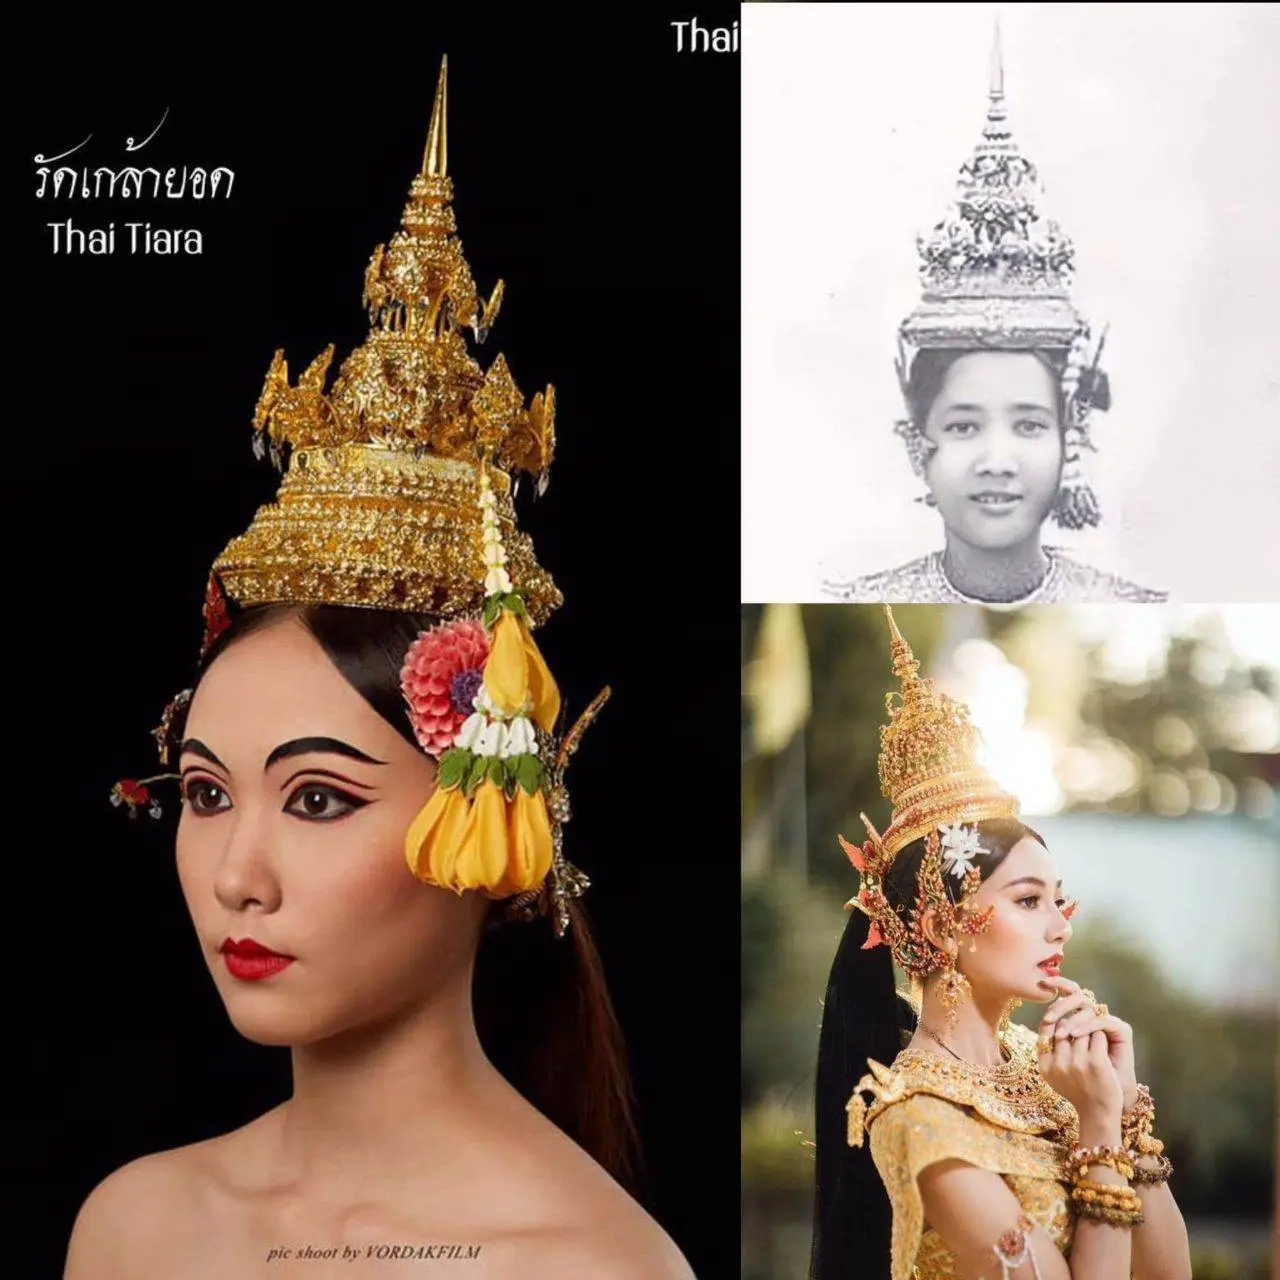 🇹🇭Thailand:Thai crowns in various designs used for dancing